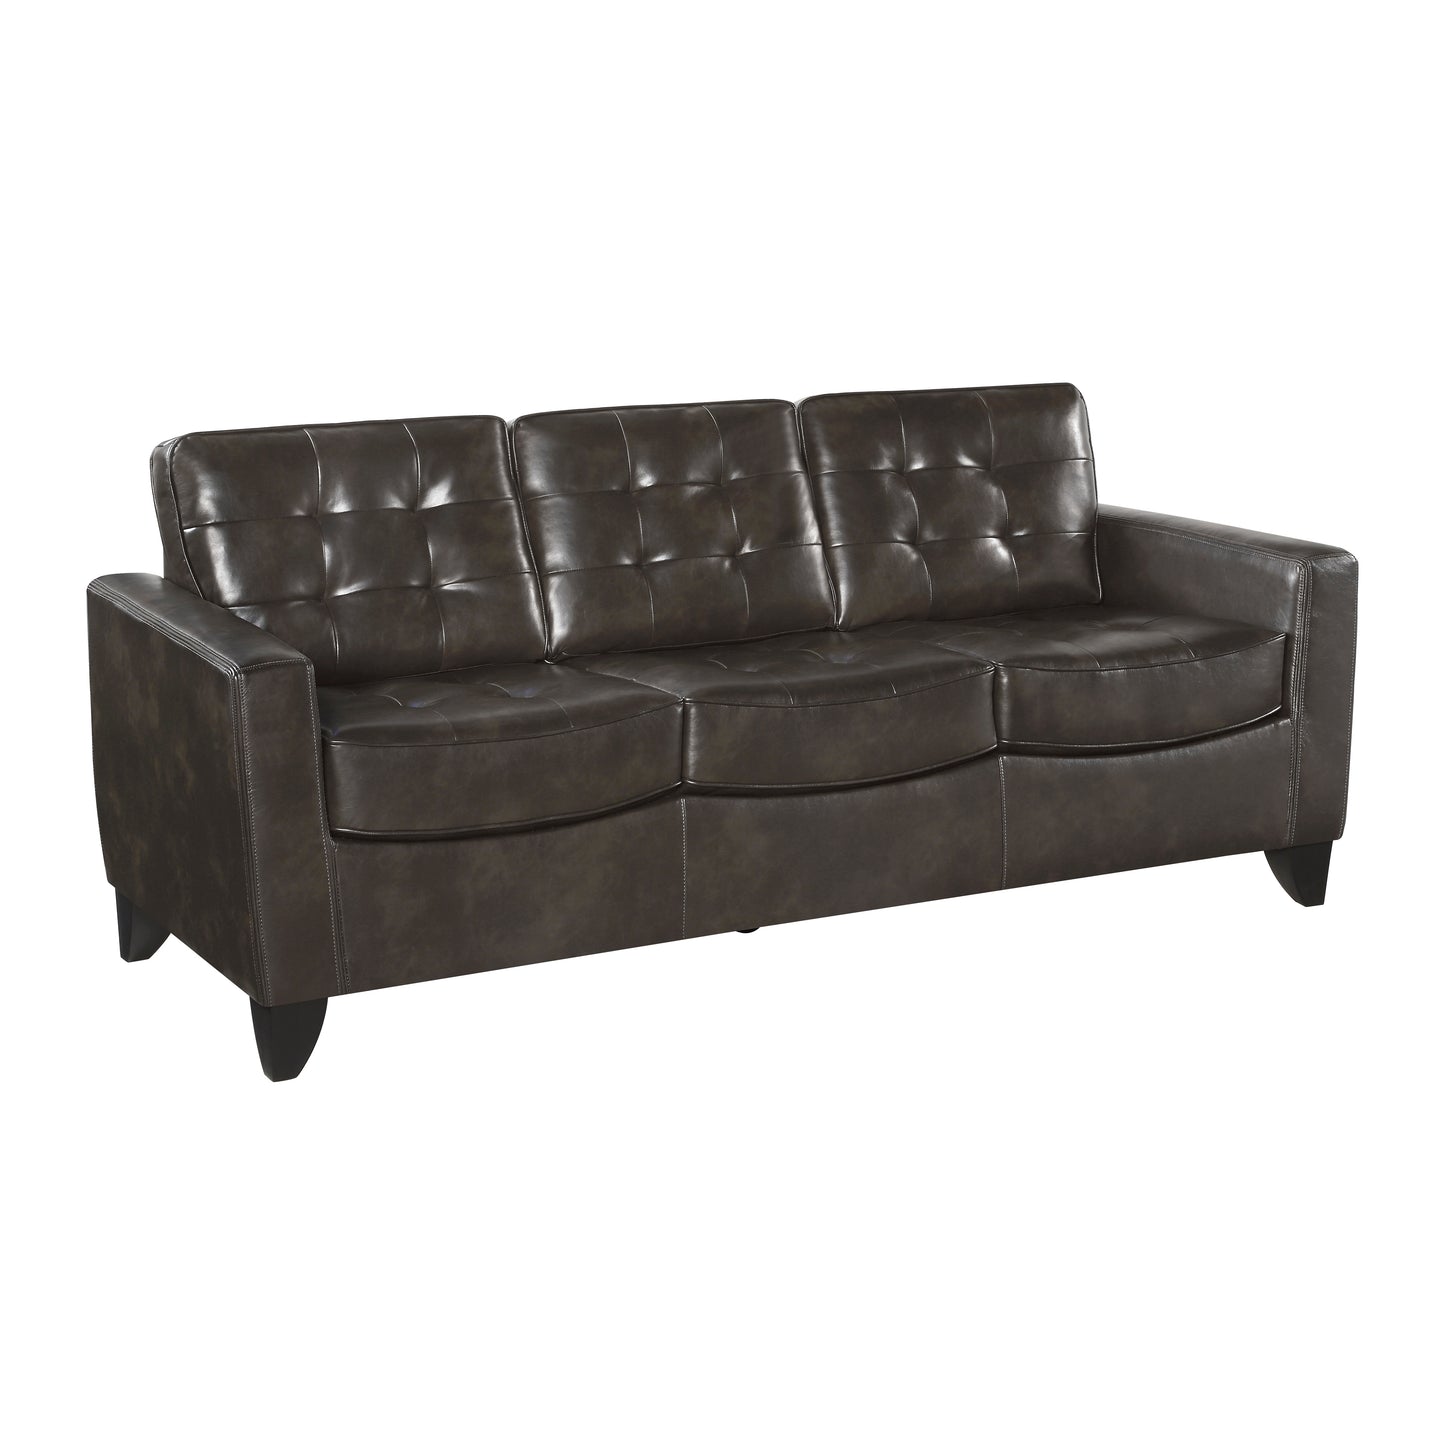 Donegal Vinly Sofa BROWN